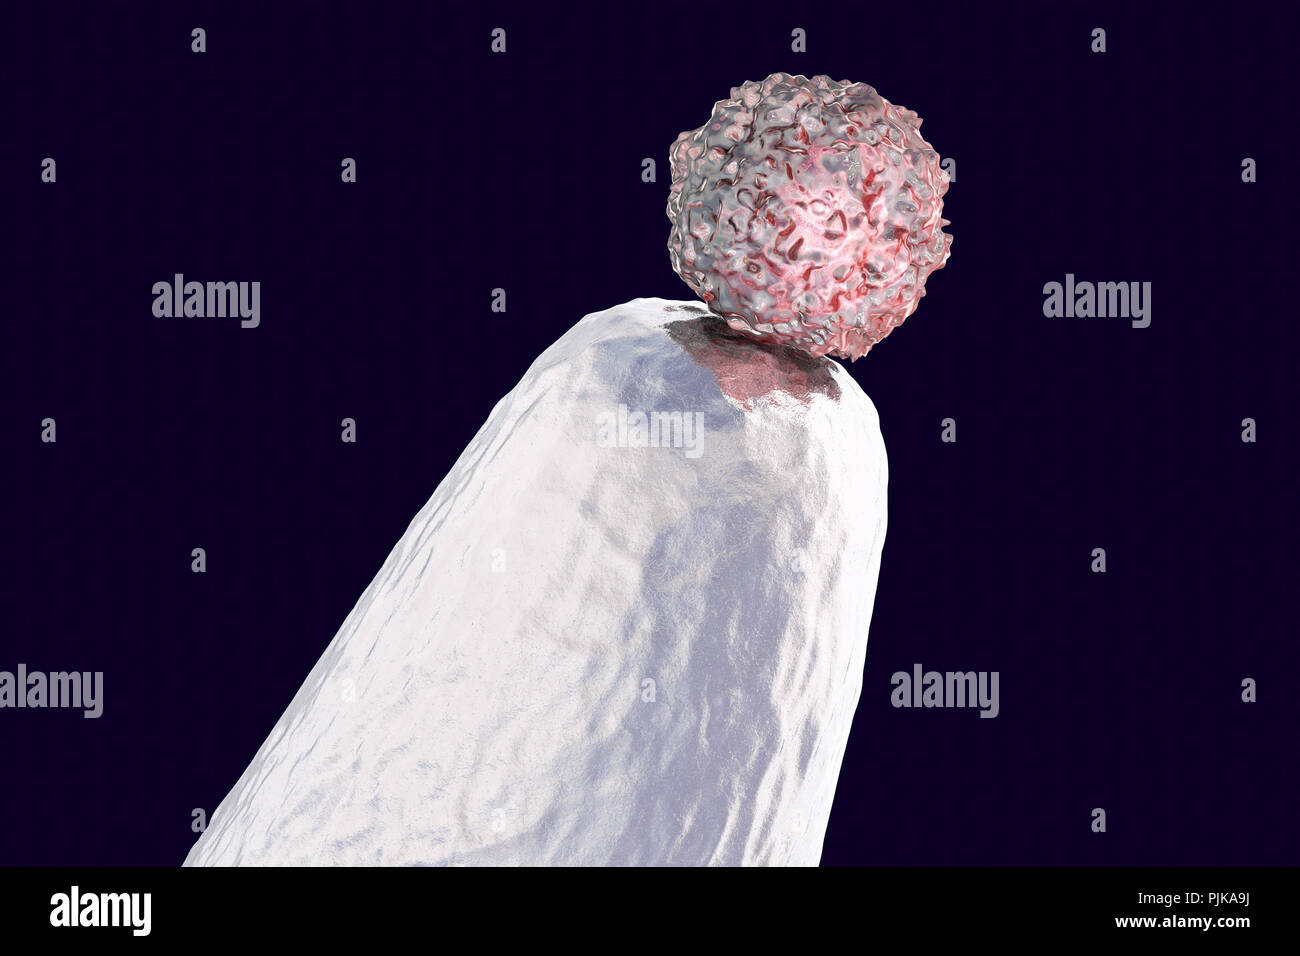 Human embryonic stem cell on a pin tip, conceptual computer illustration. Stock Photo